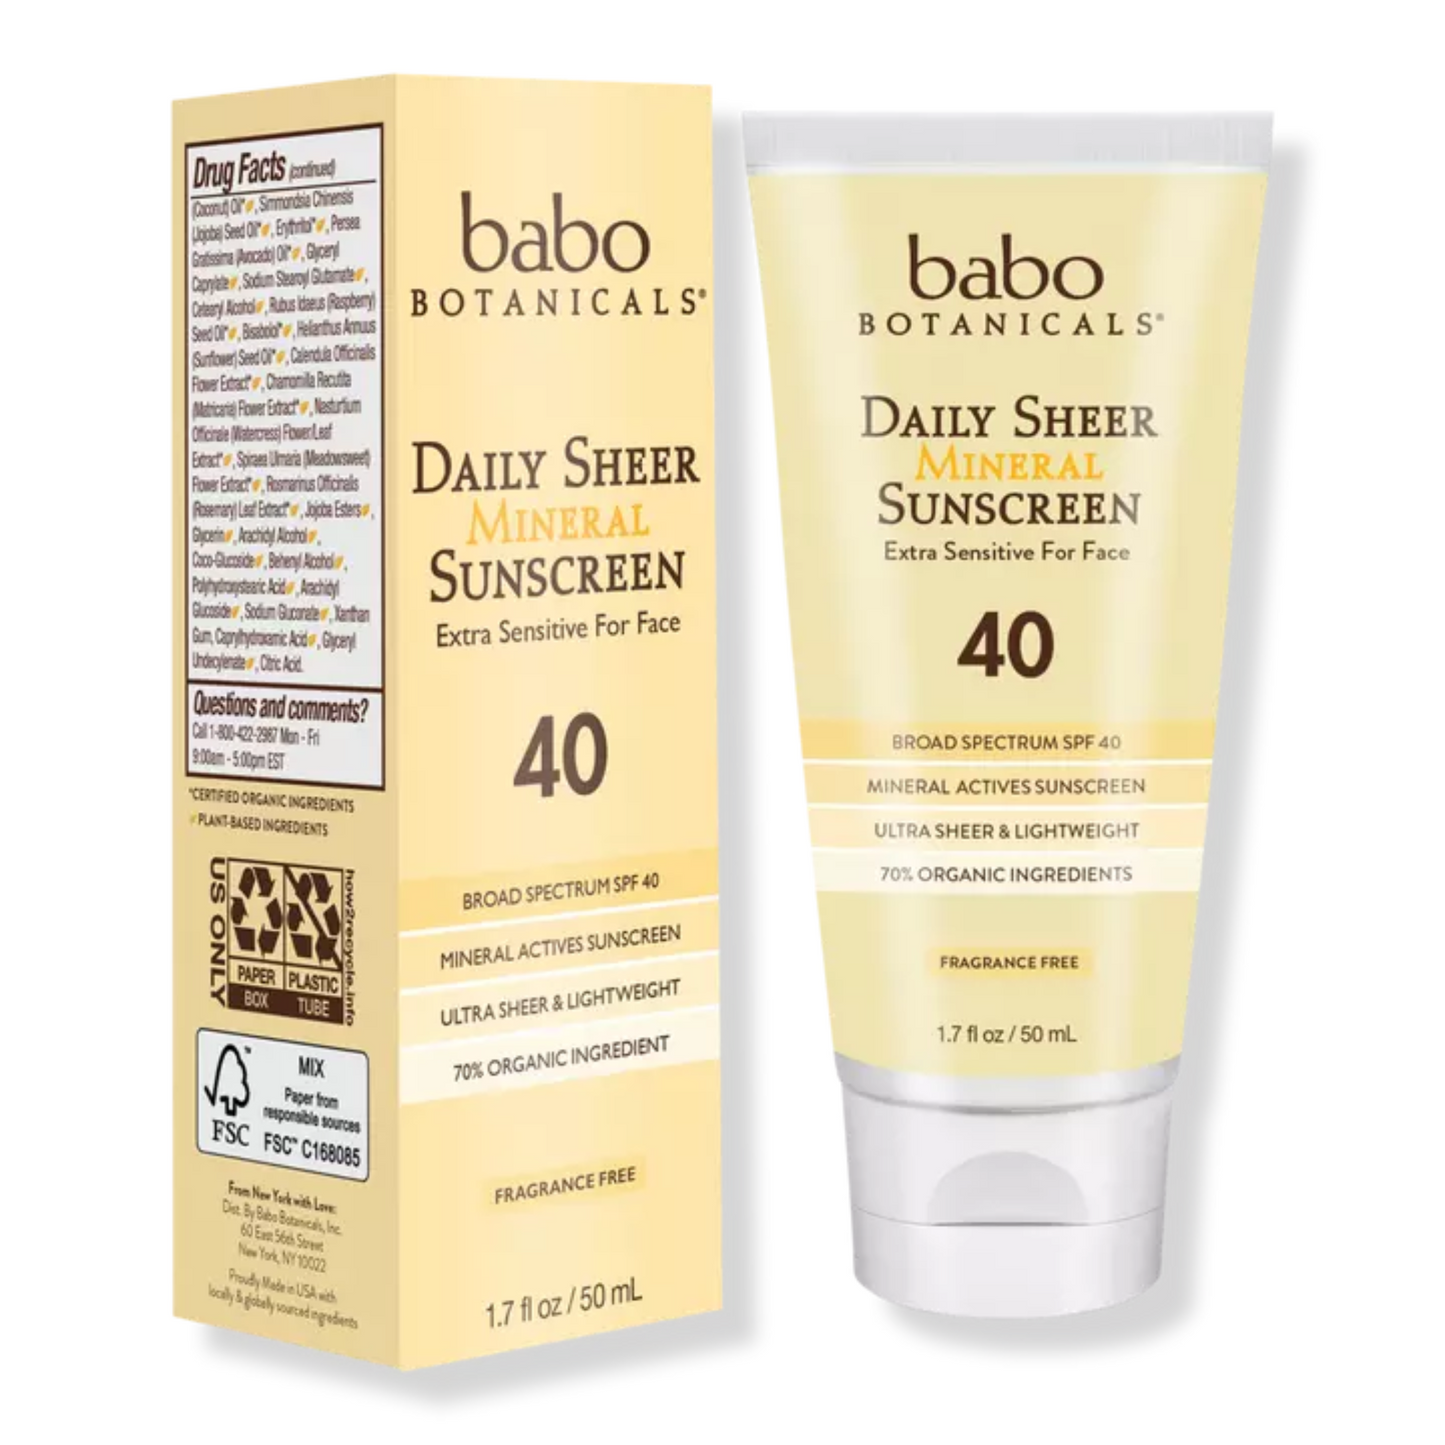 Primary Image of Daily Sheer Mineral Sunscreen SPF 40